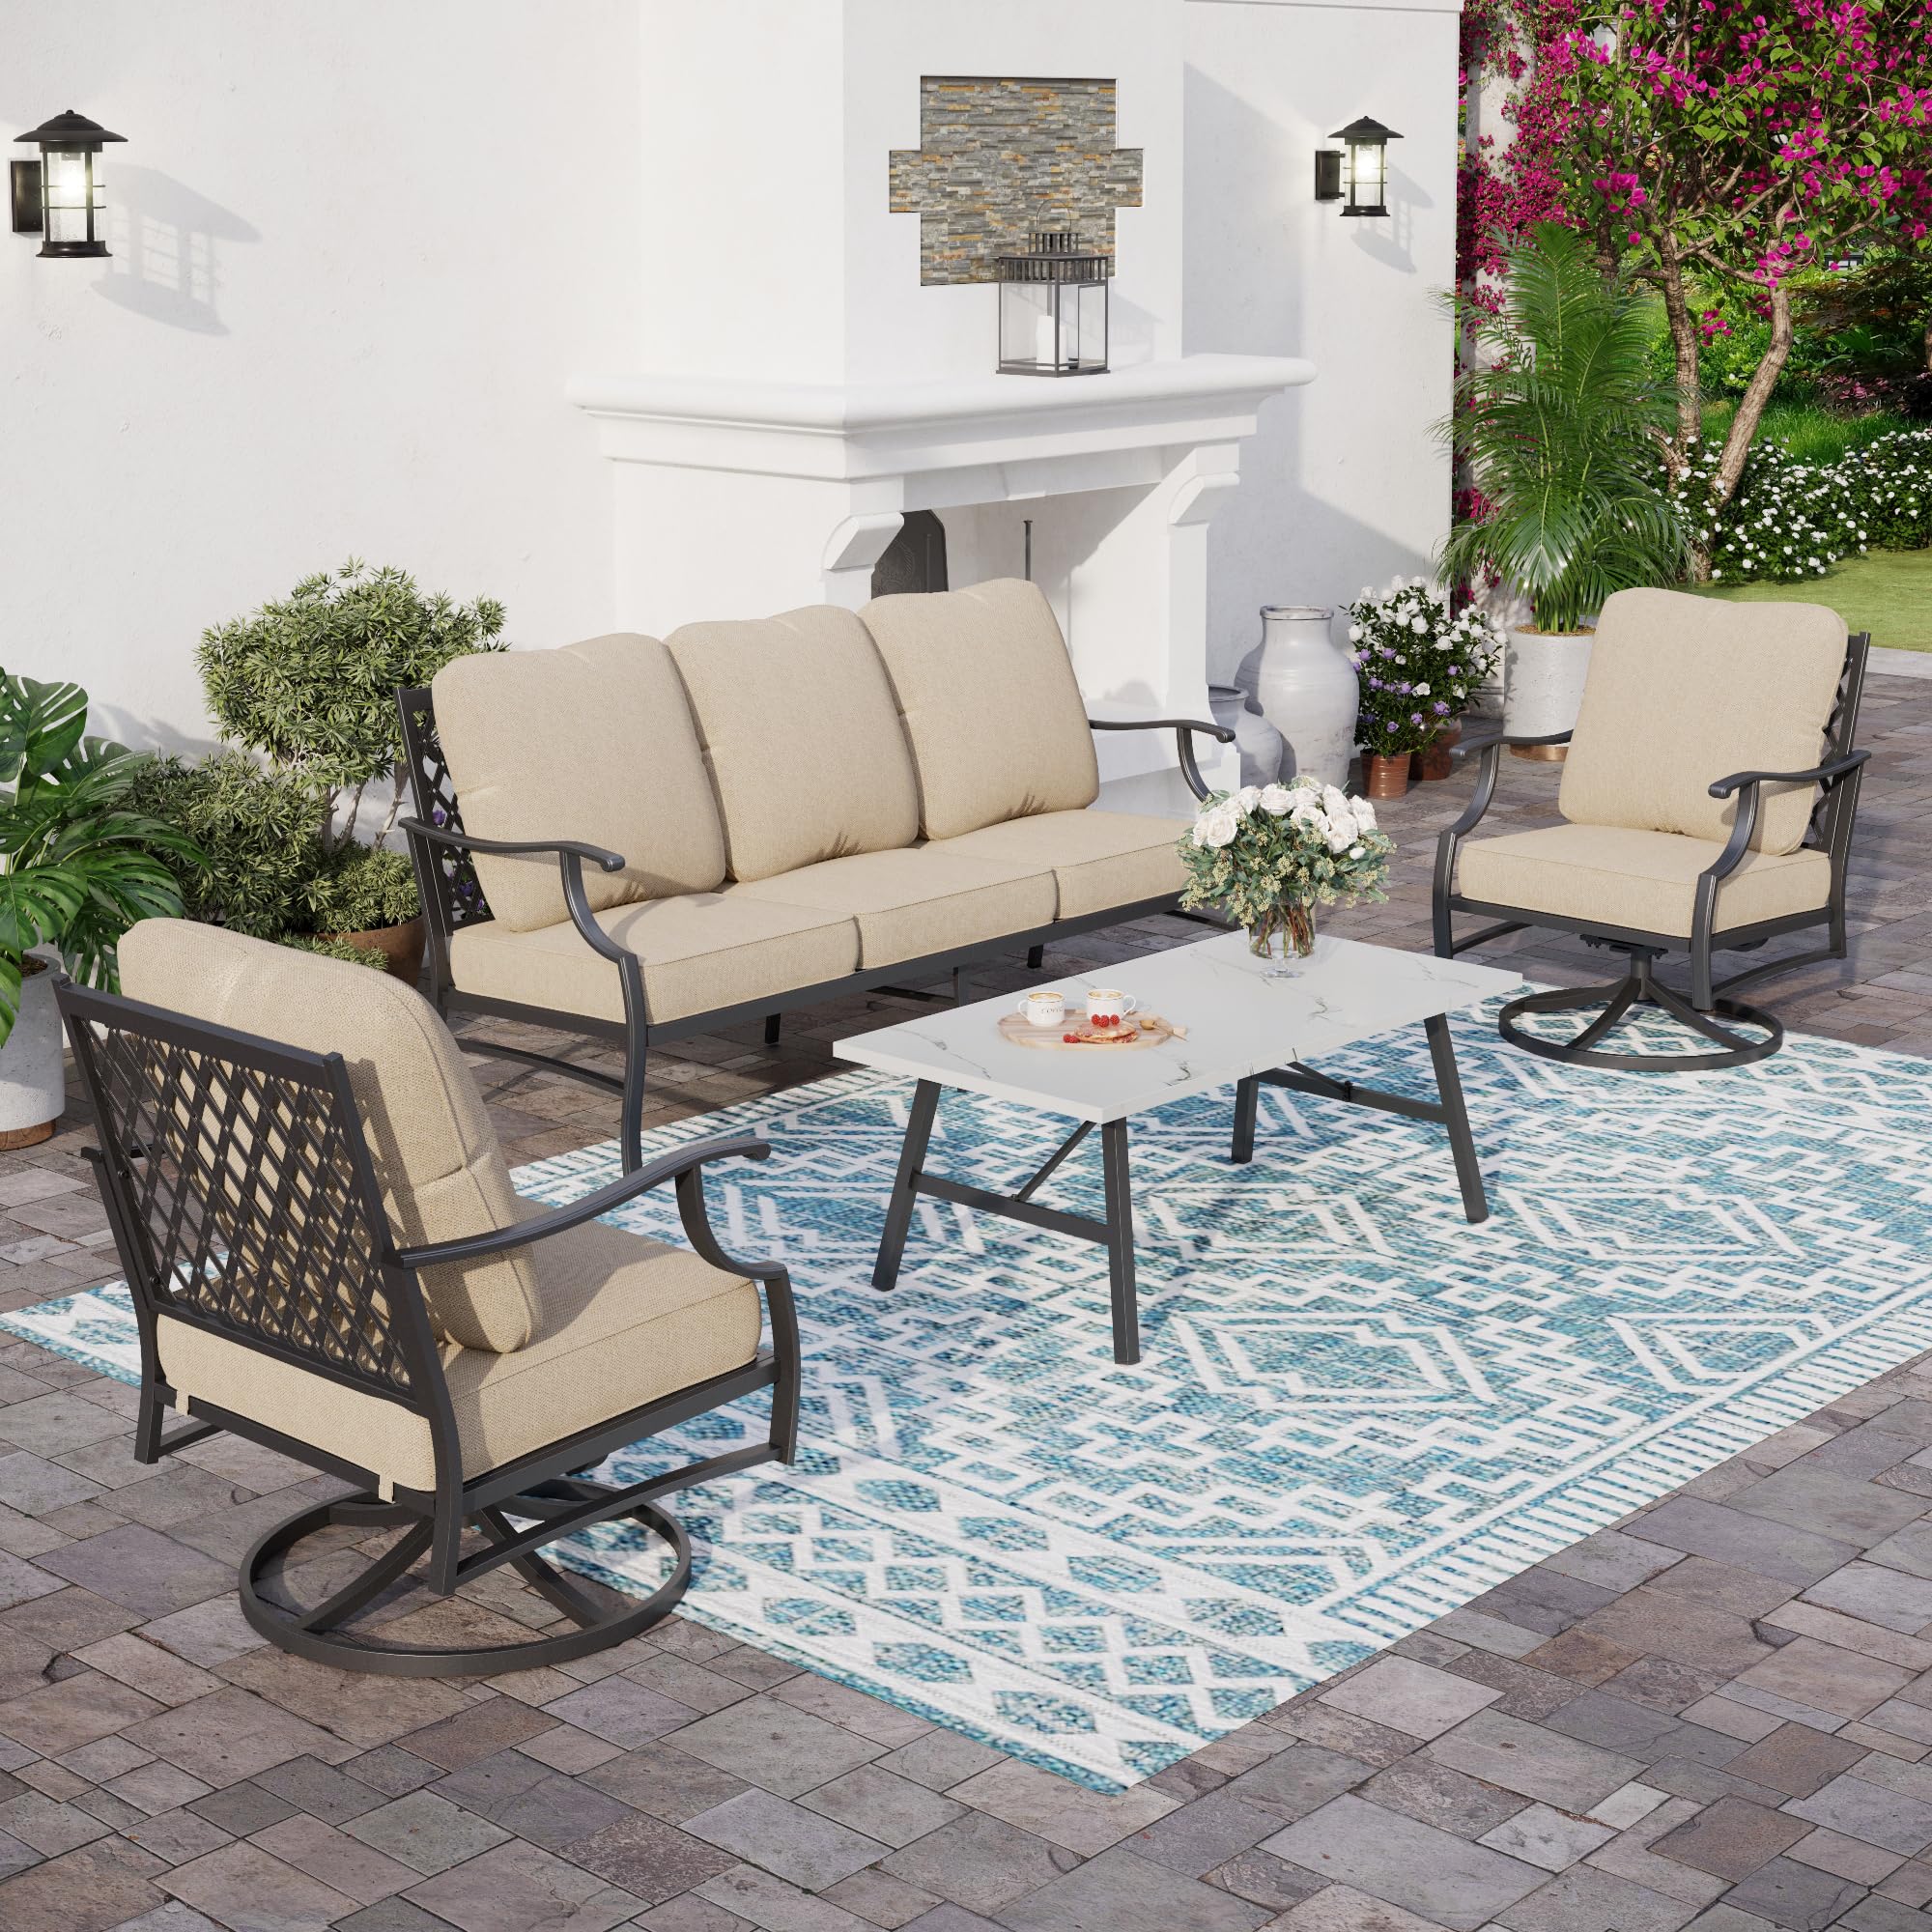 Patio Furniture Set, 4 Piece Modern Metal Outdoor Patio Furniture, 3 Seater Couch